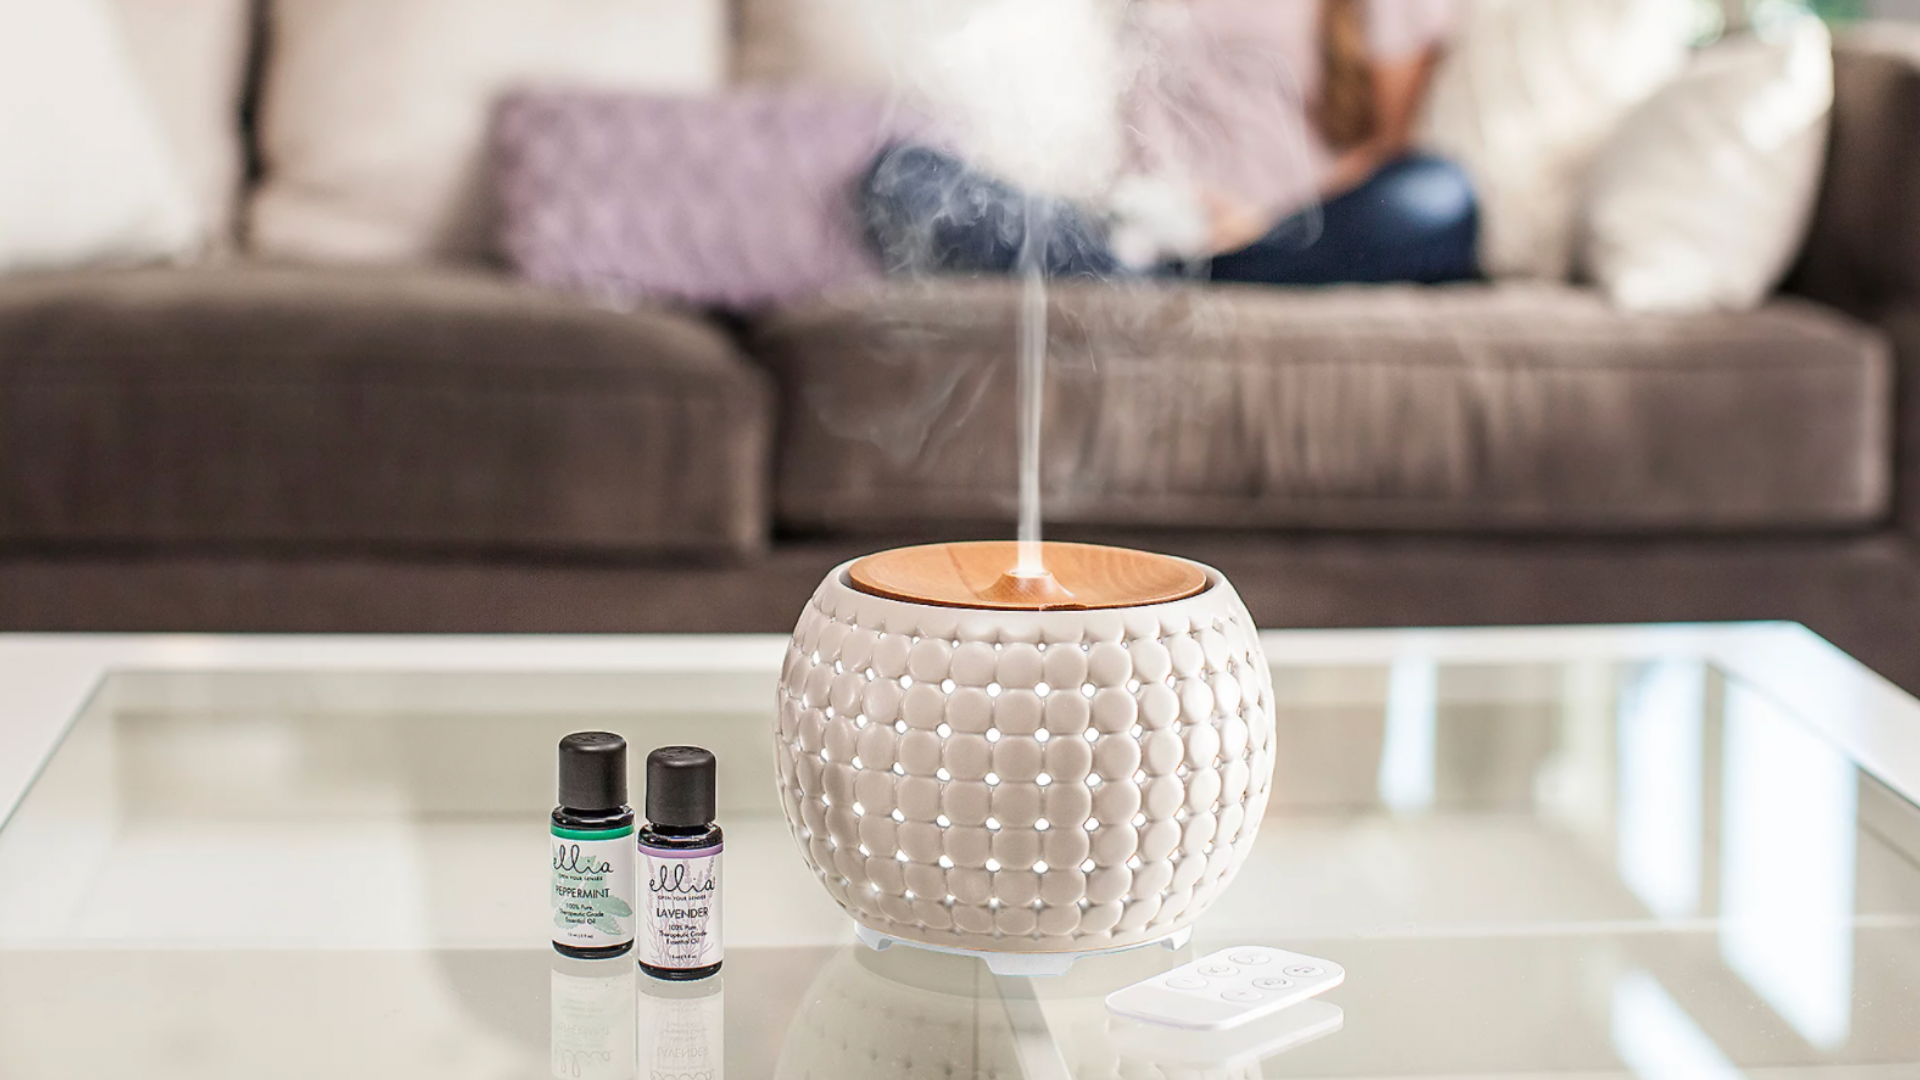 A room diffuser releases vapor in a living room.